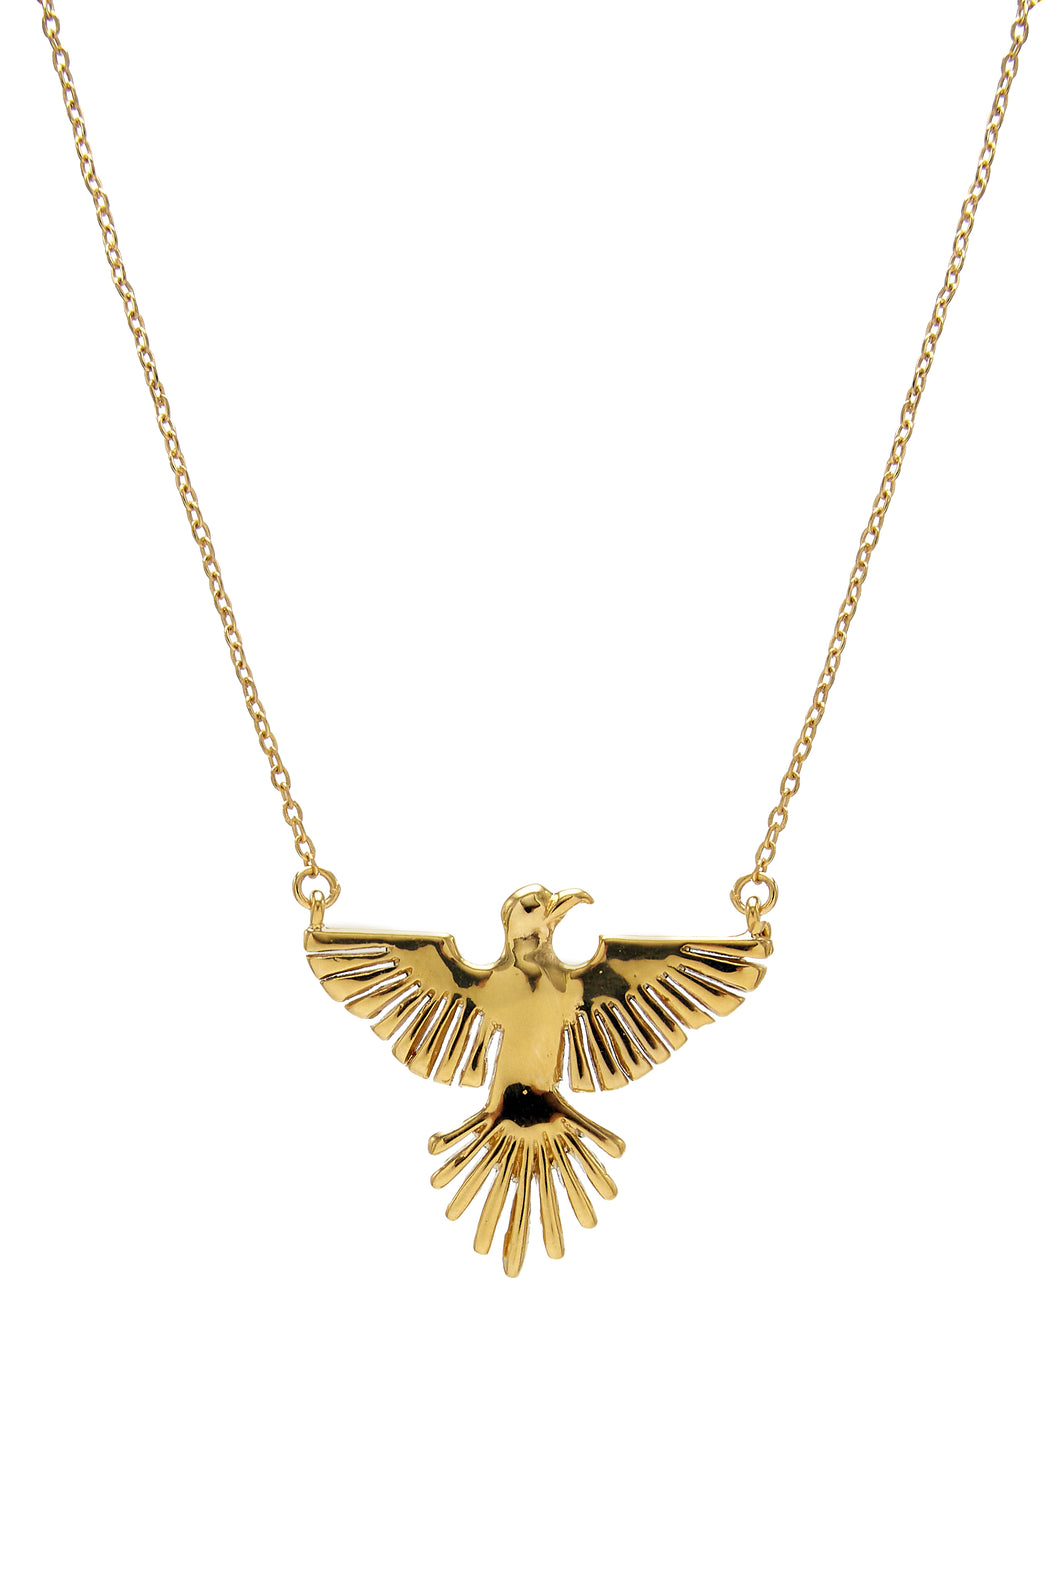 Necklace Aguila / Sophie Simone Designs Jewelry